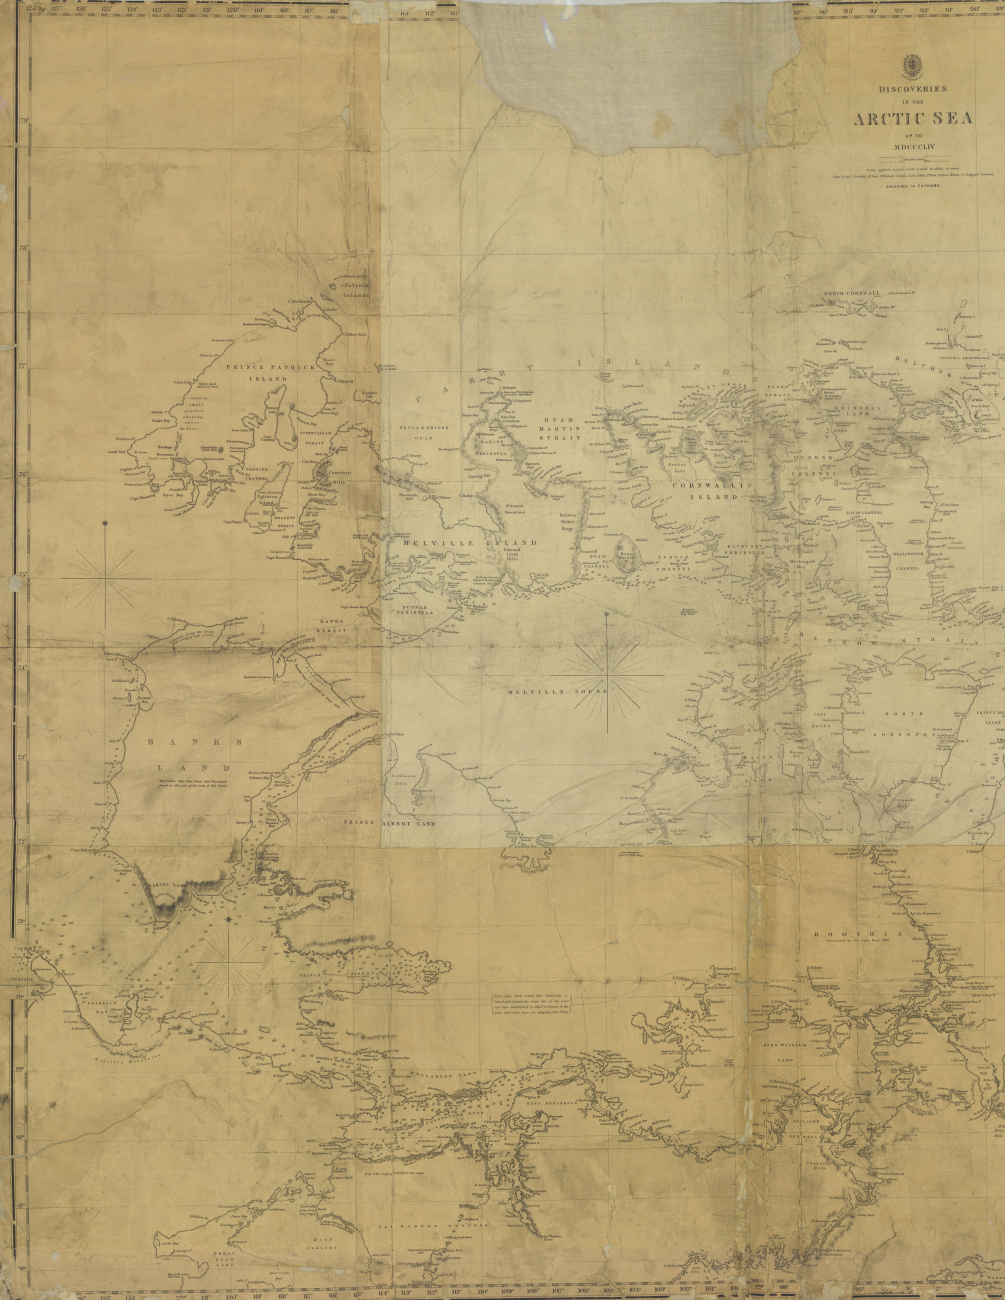 Discoveries in the Arctic Sea up to 1854 , western half including Longitude128 W to 89W